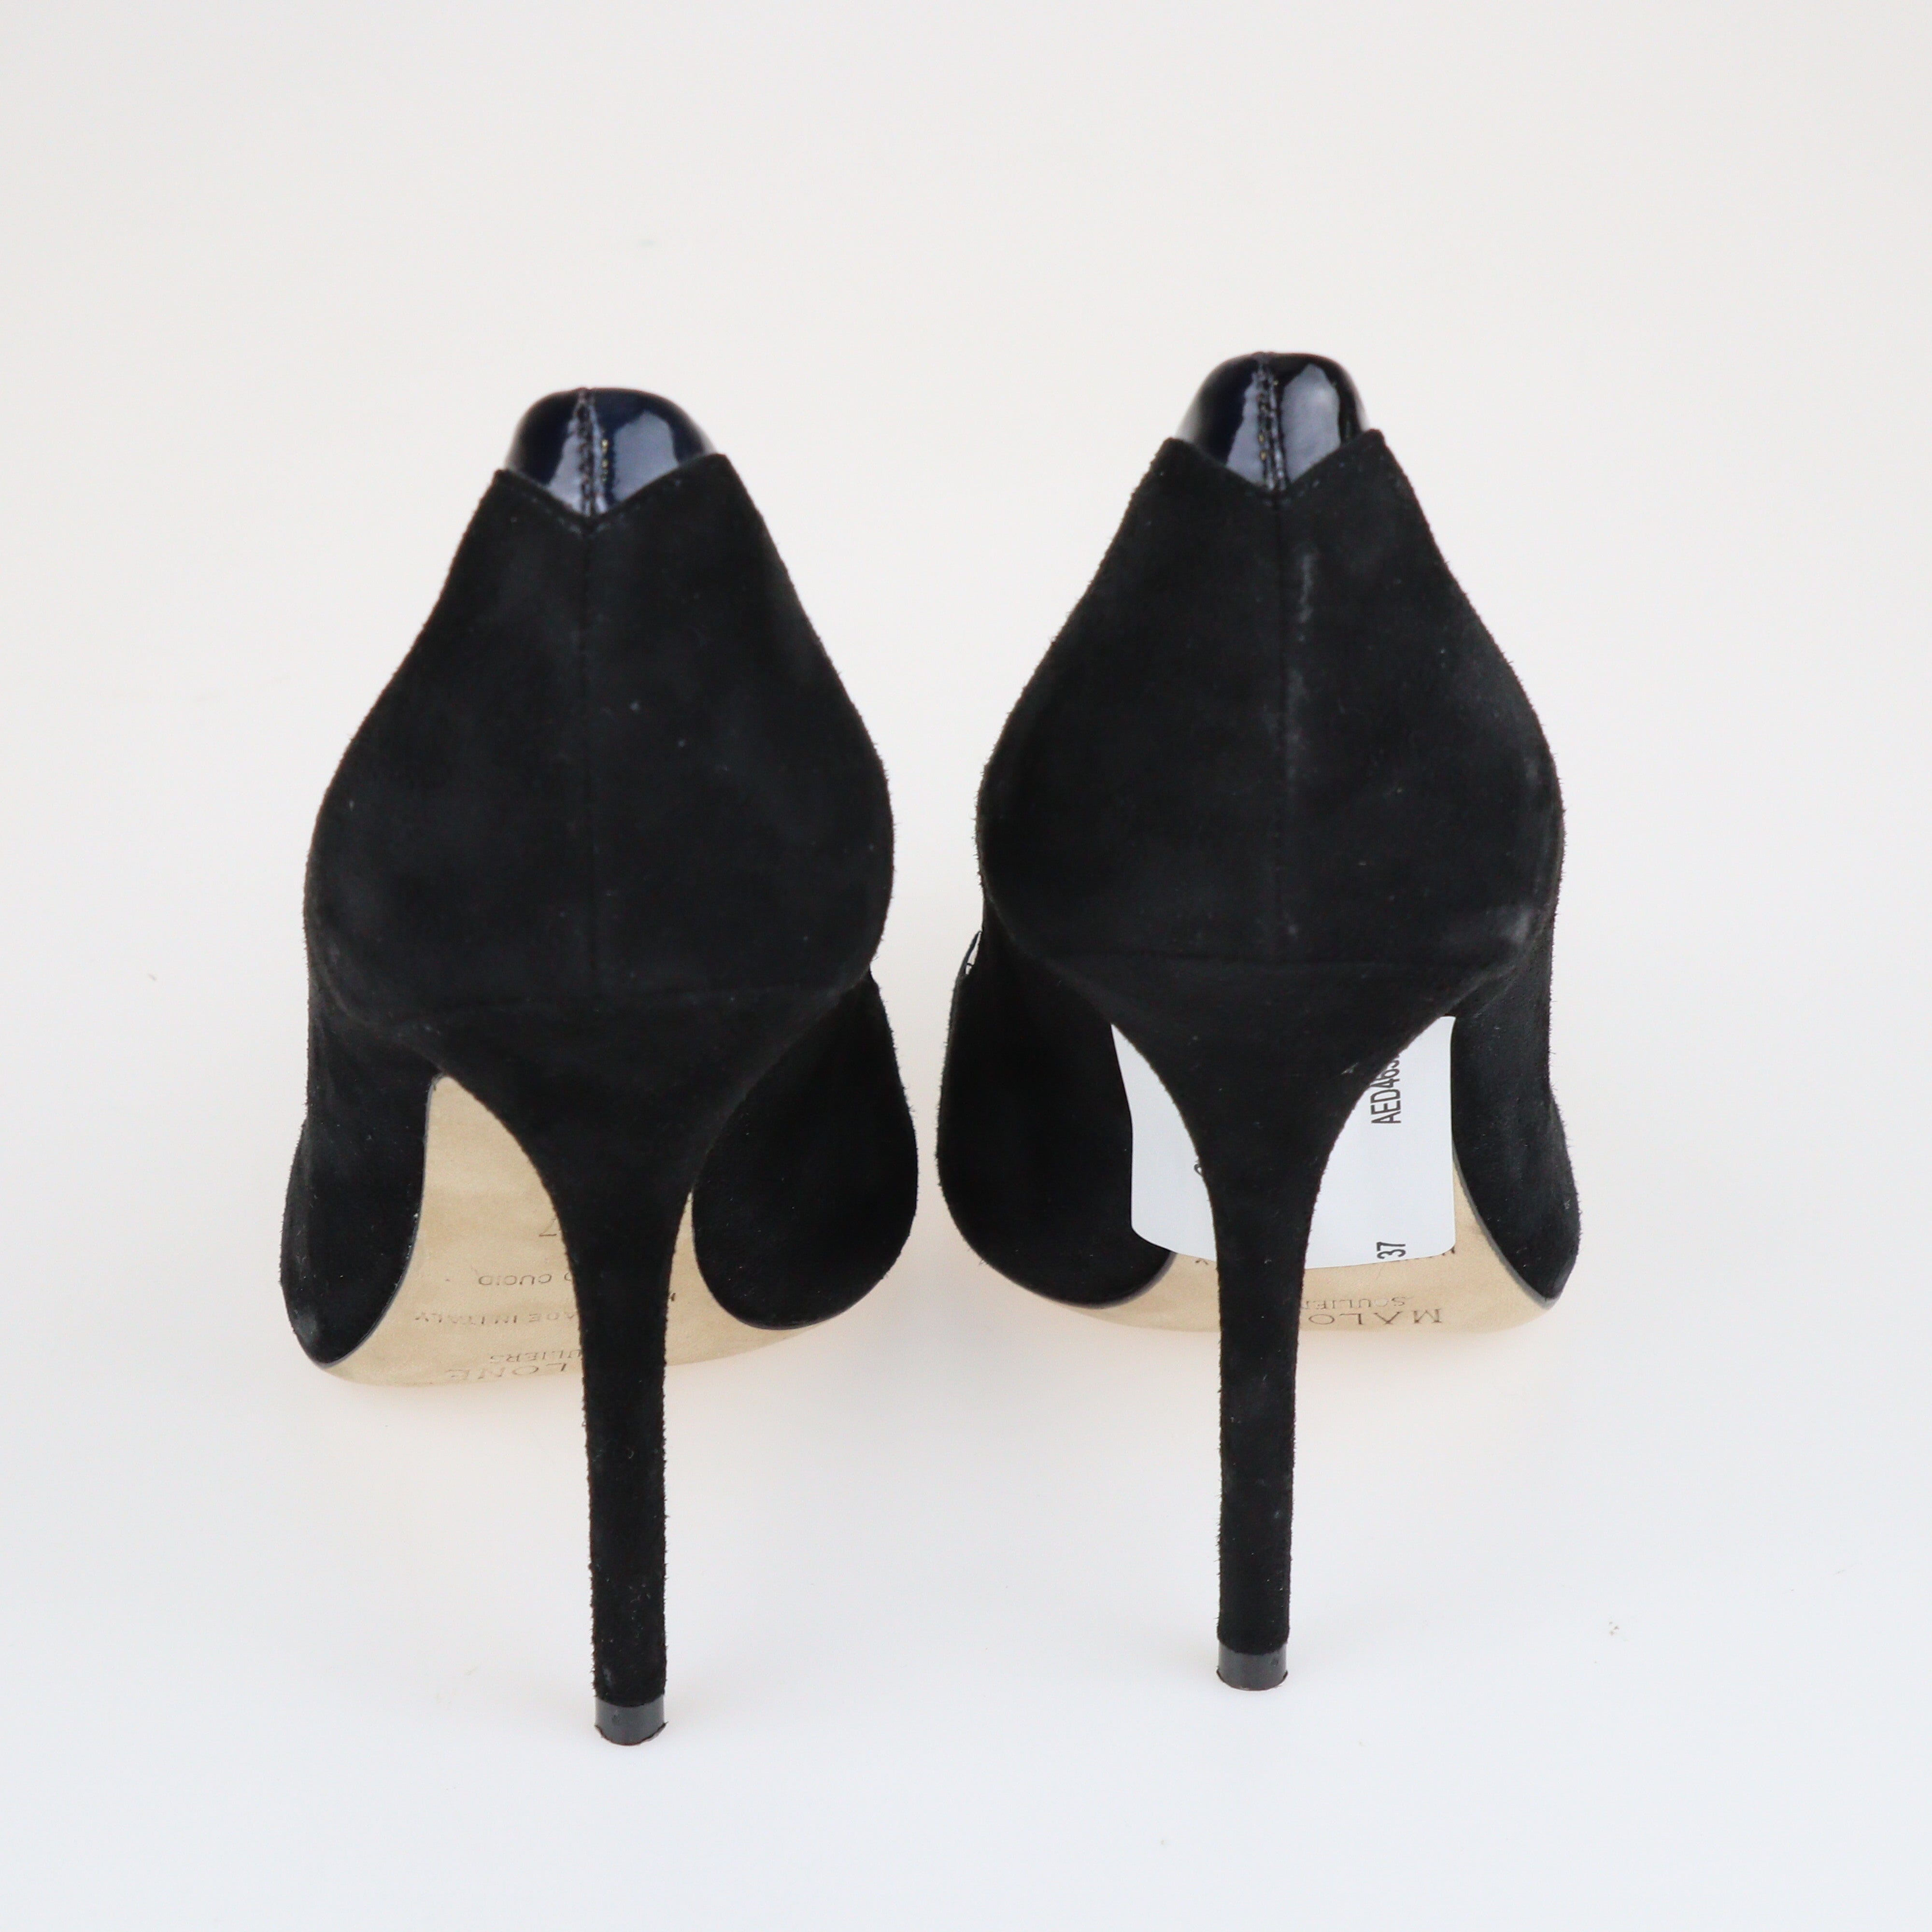 Black Pointed Toe Pumps Shoes Malone Souliers 